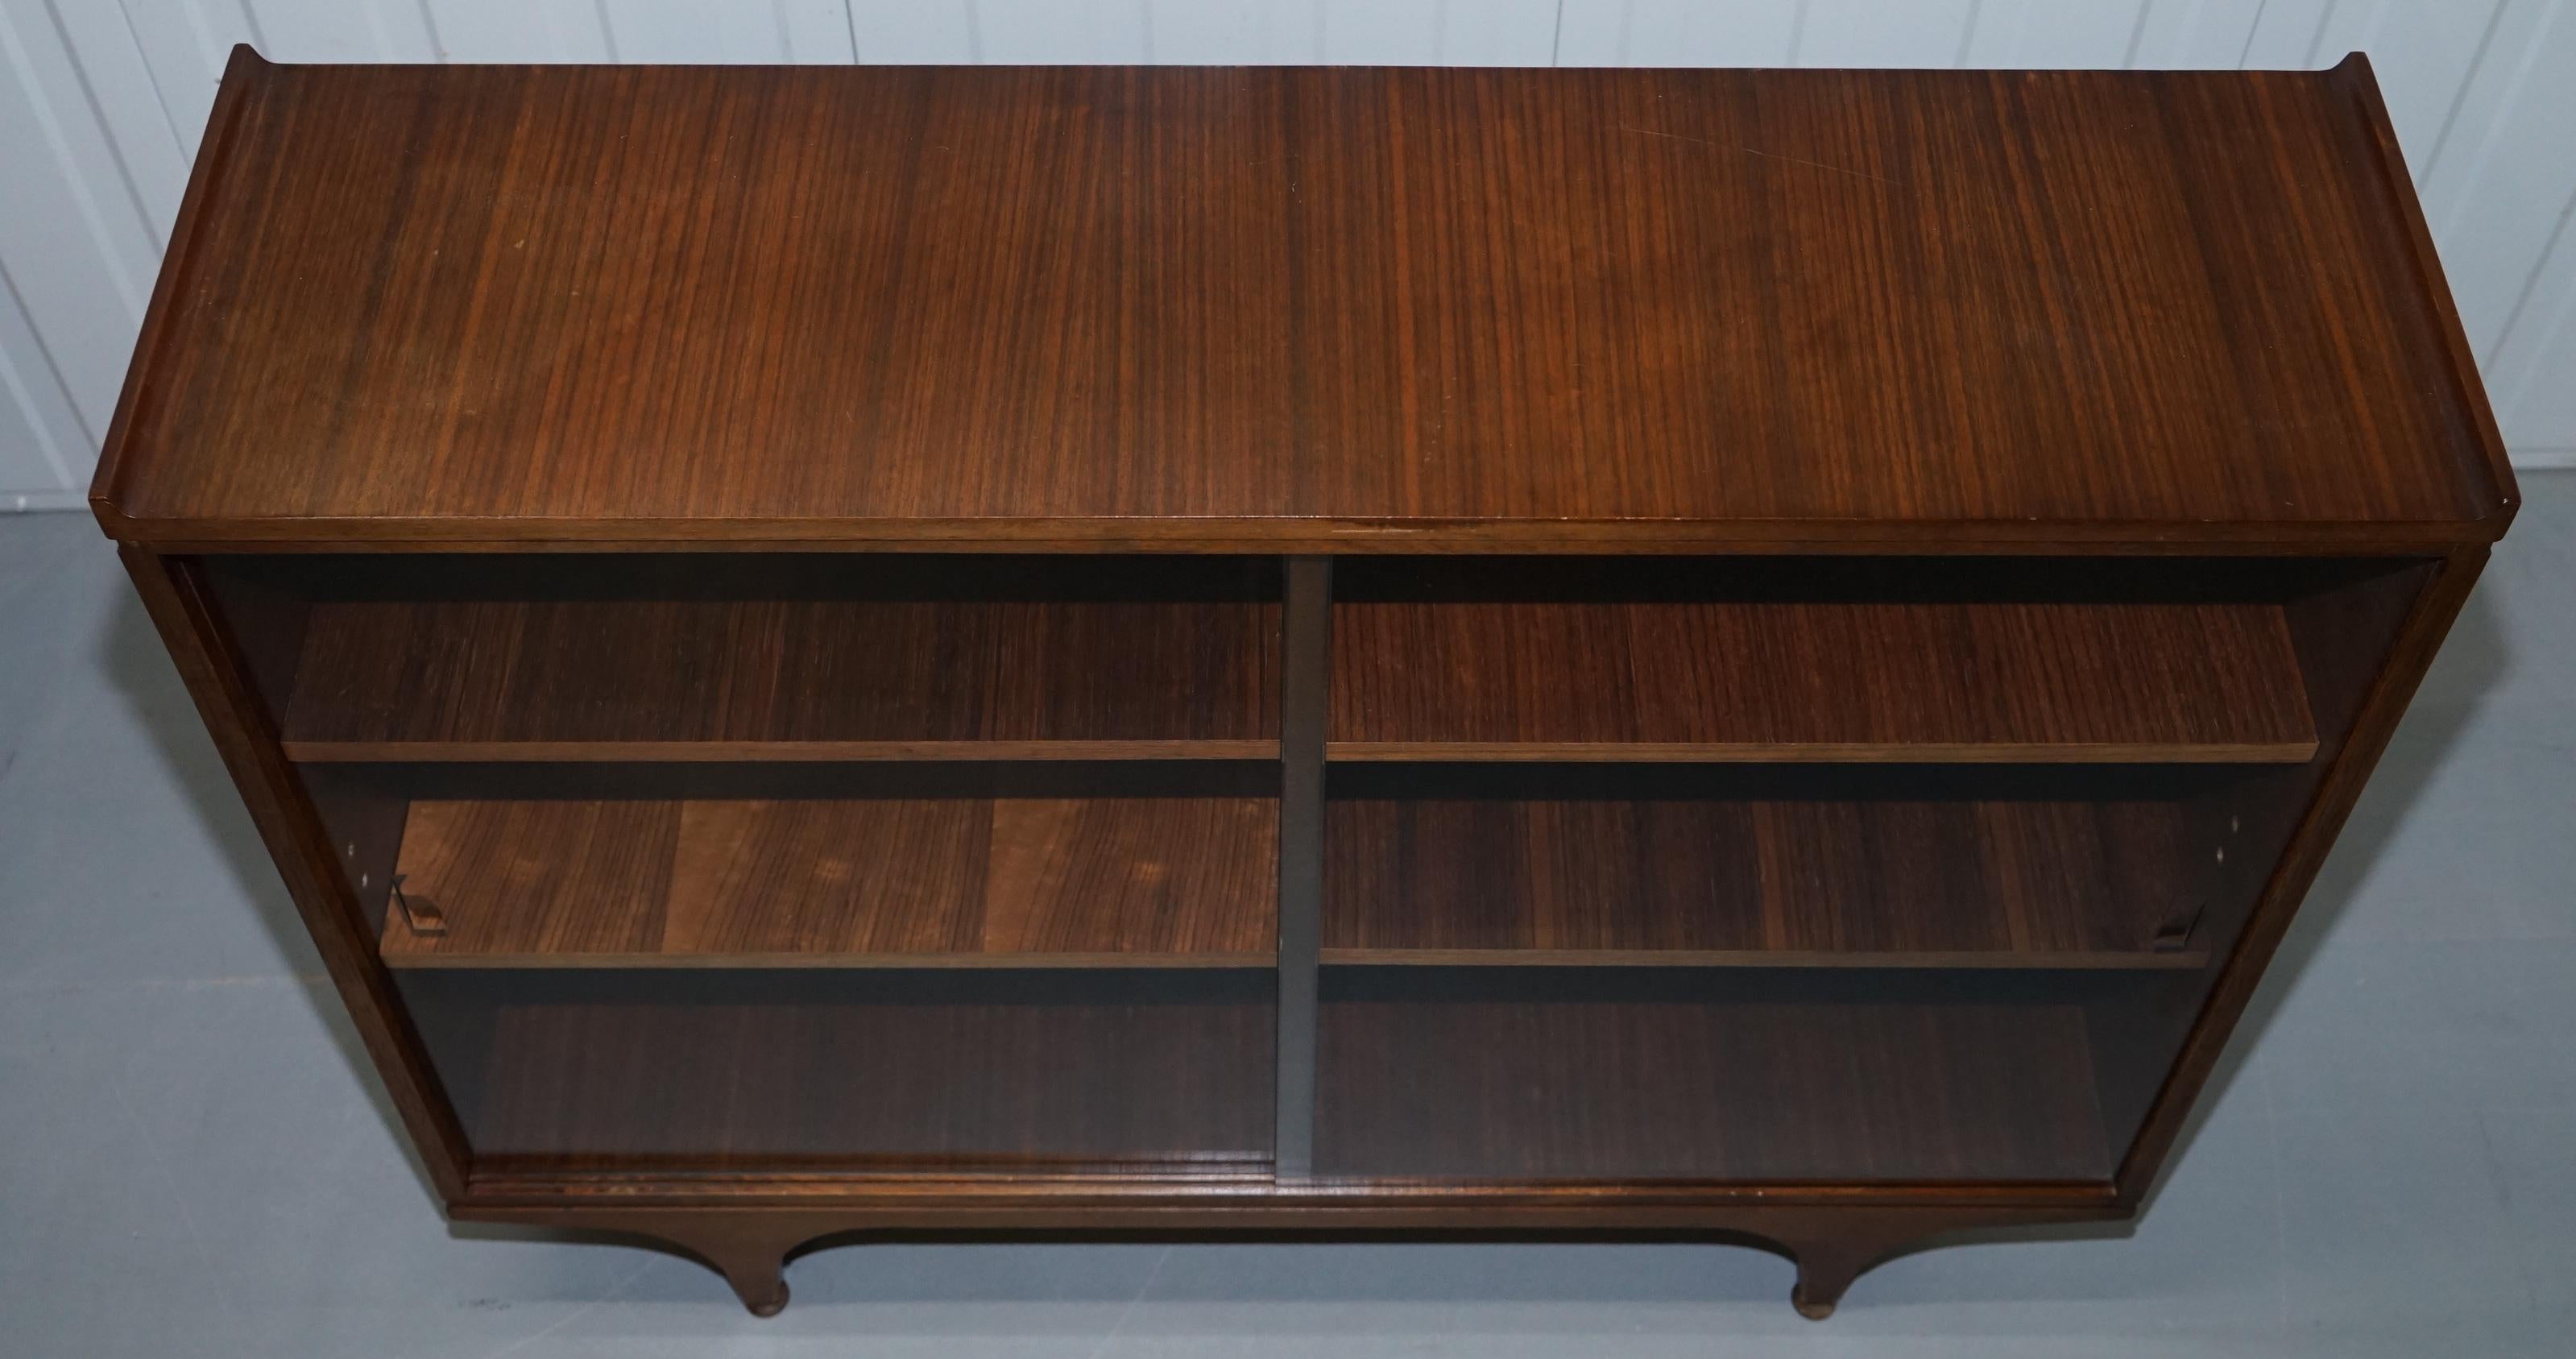 Hand-Crafted Pair of Sculpted Mid-Century Modern Teak Bookcases with Glass Sliding Doors